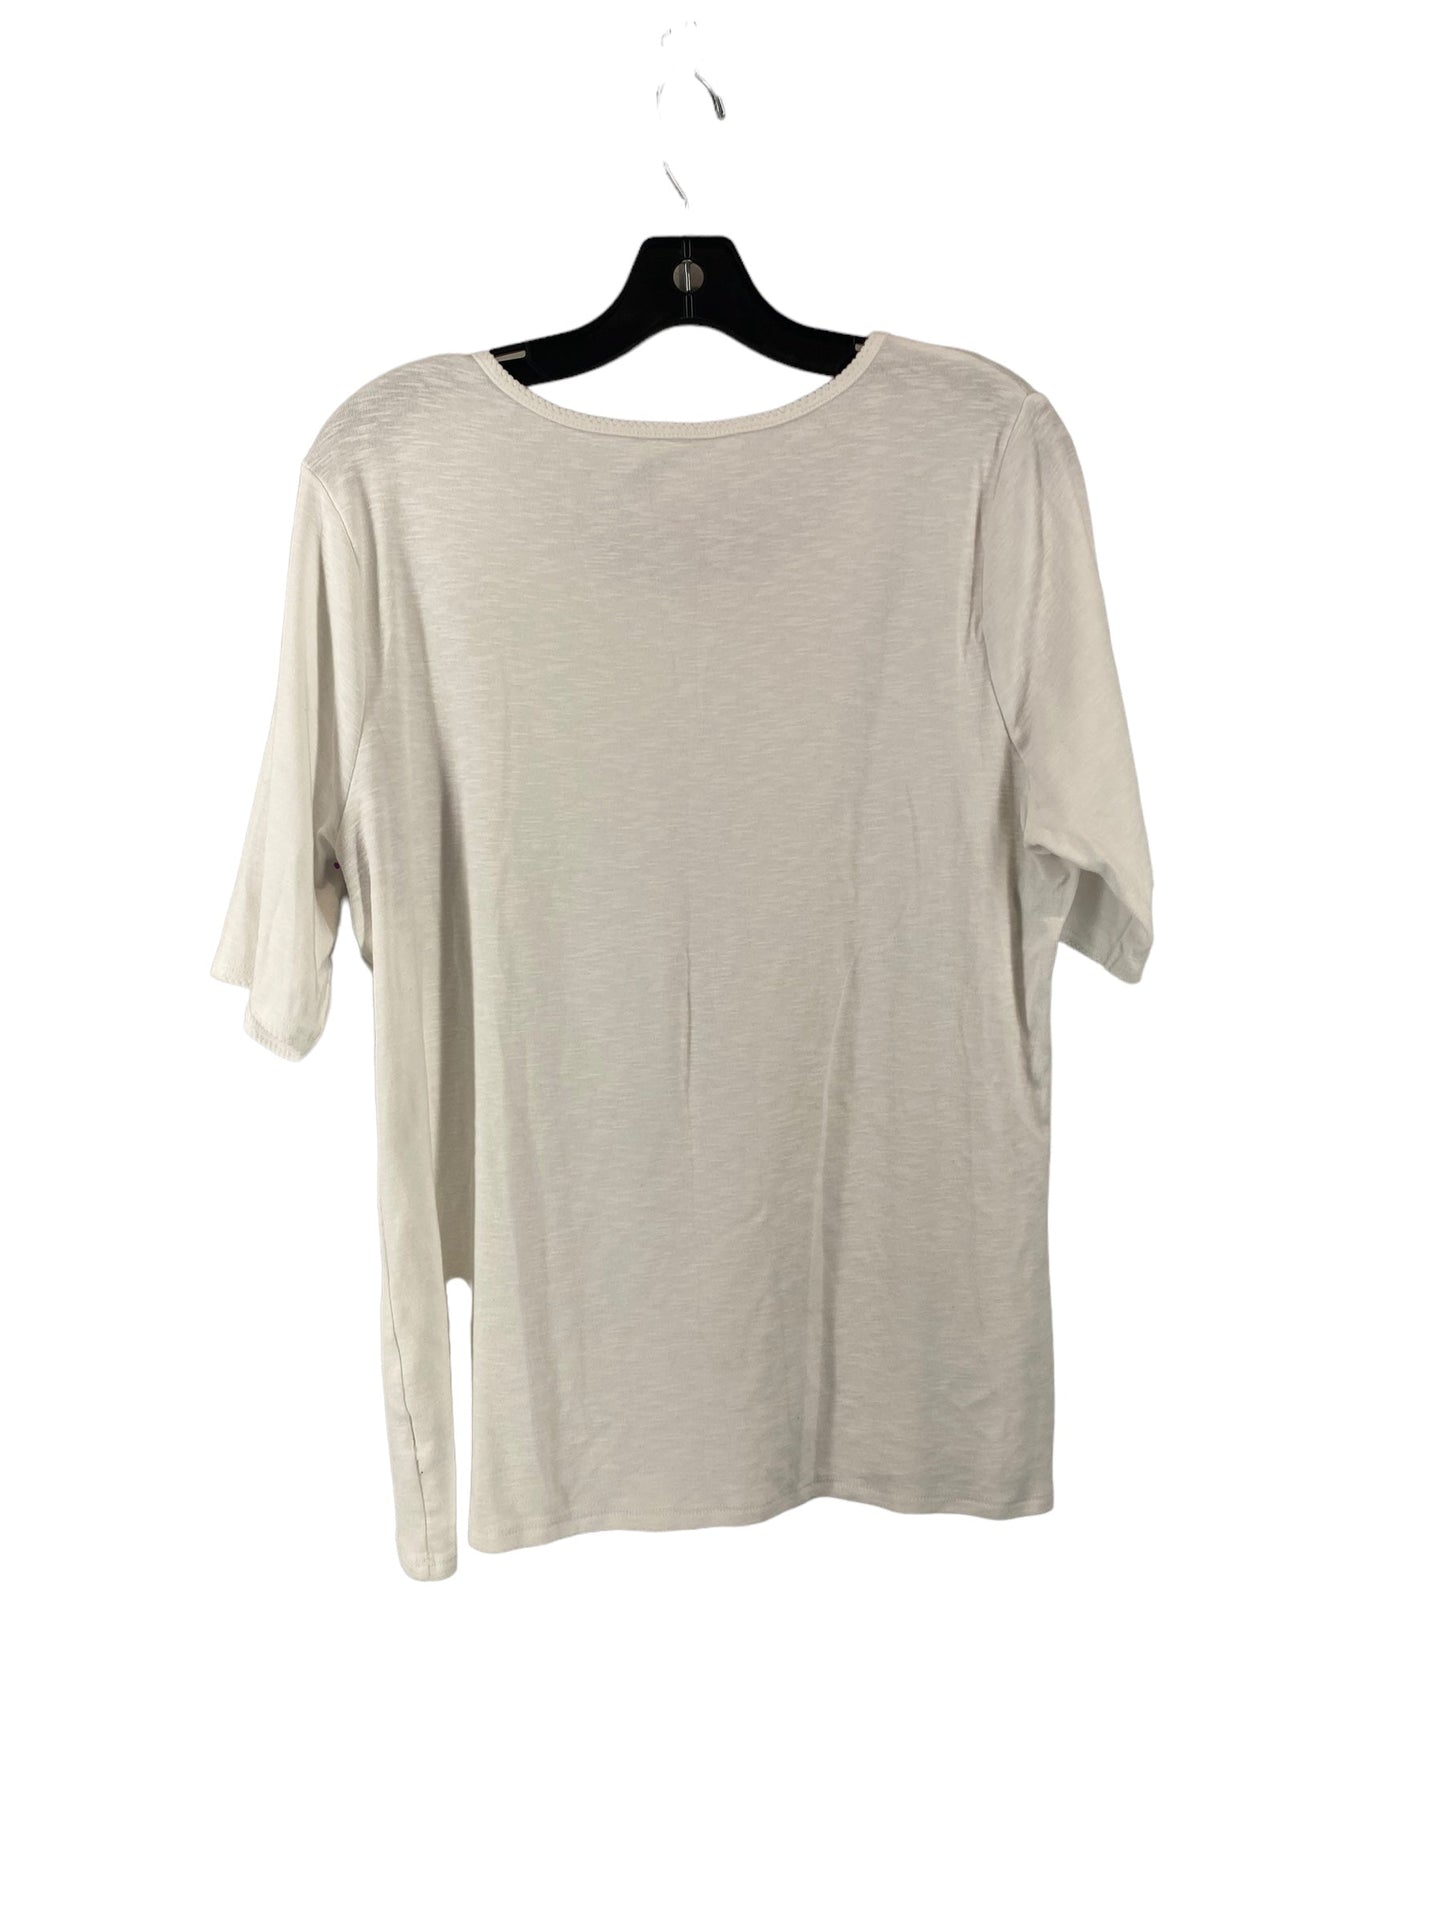 Top Short Sleeve Basic By Time And Tru  Size: Xl